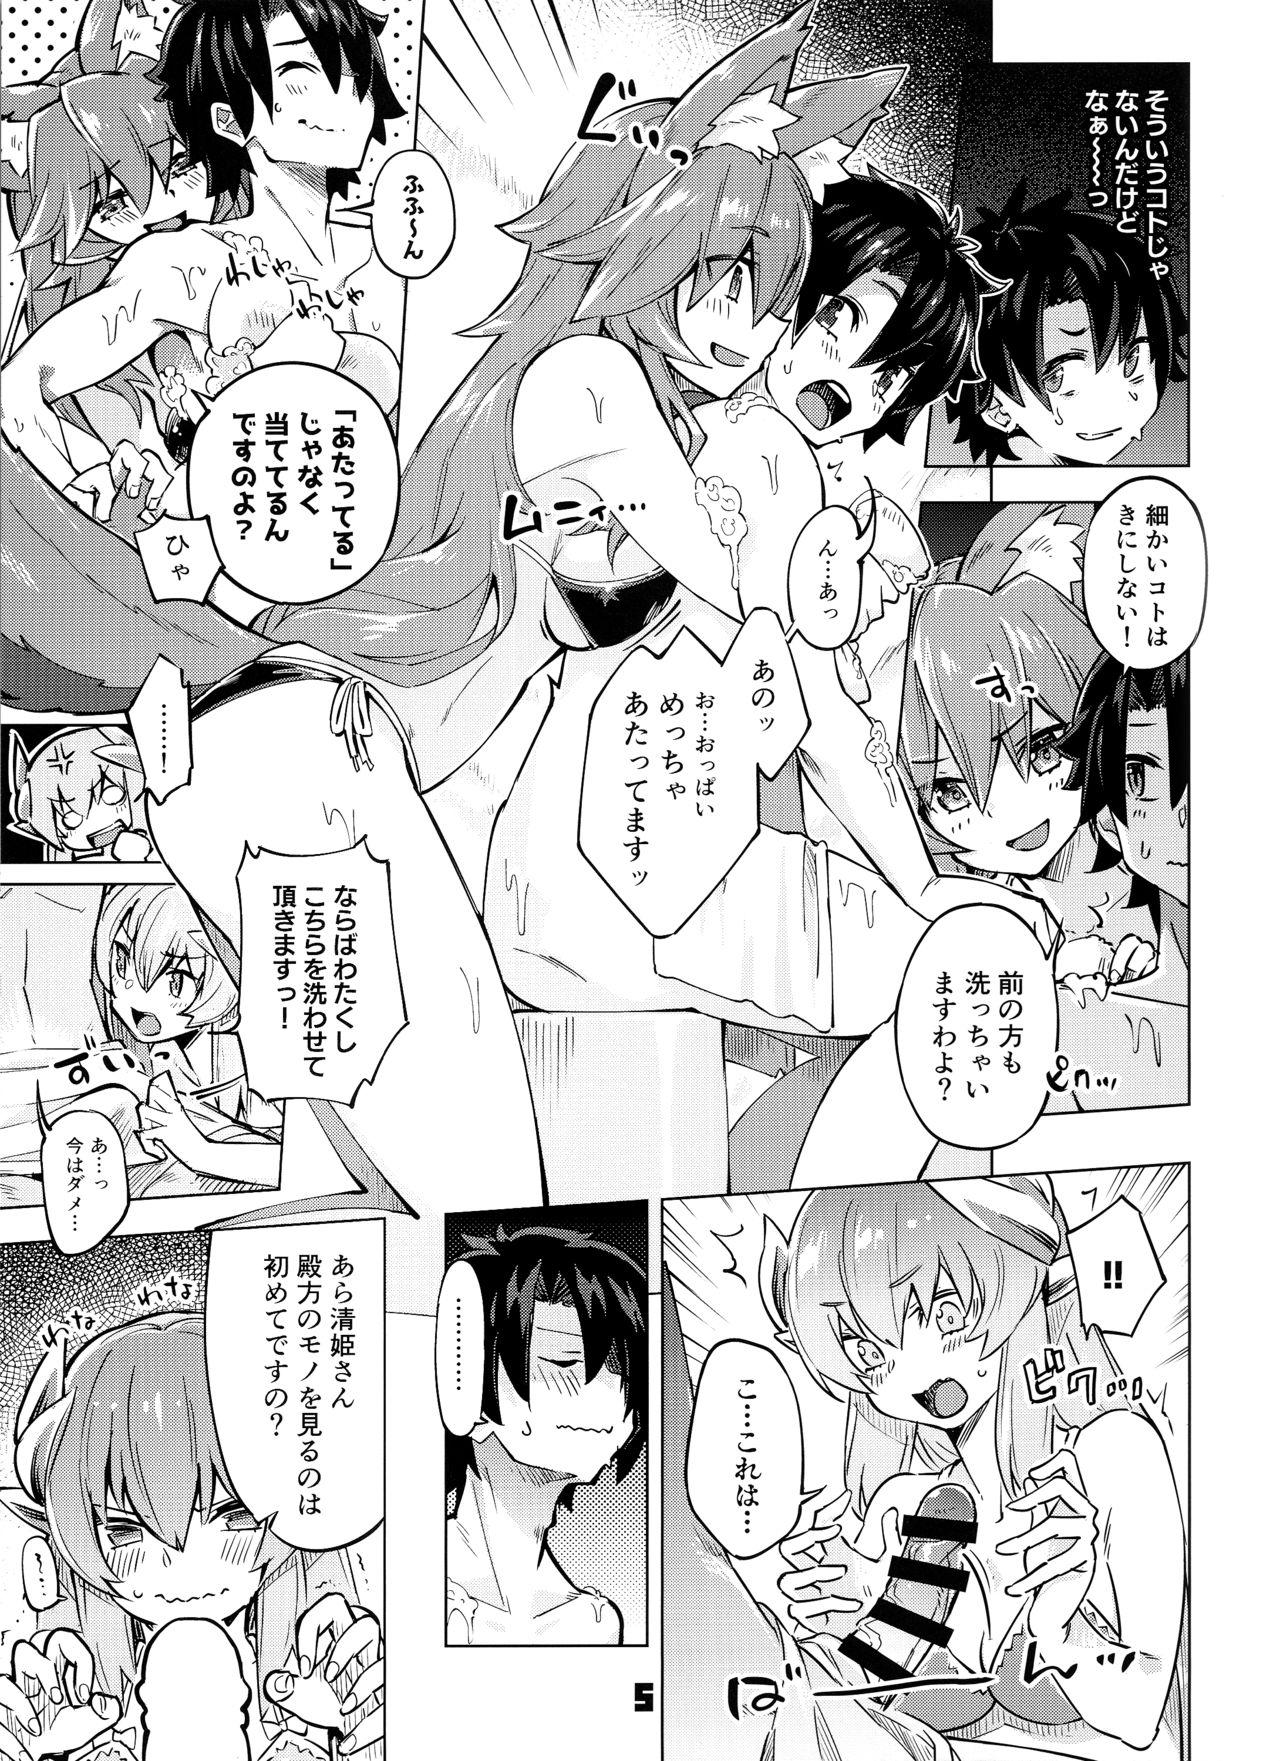 Tit Sex Shinai to Derarenai My Room 2 - My room can not go out - Fate grand order British - Page 4